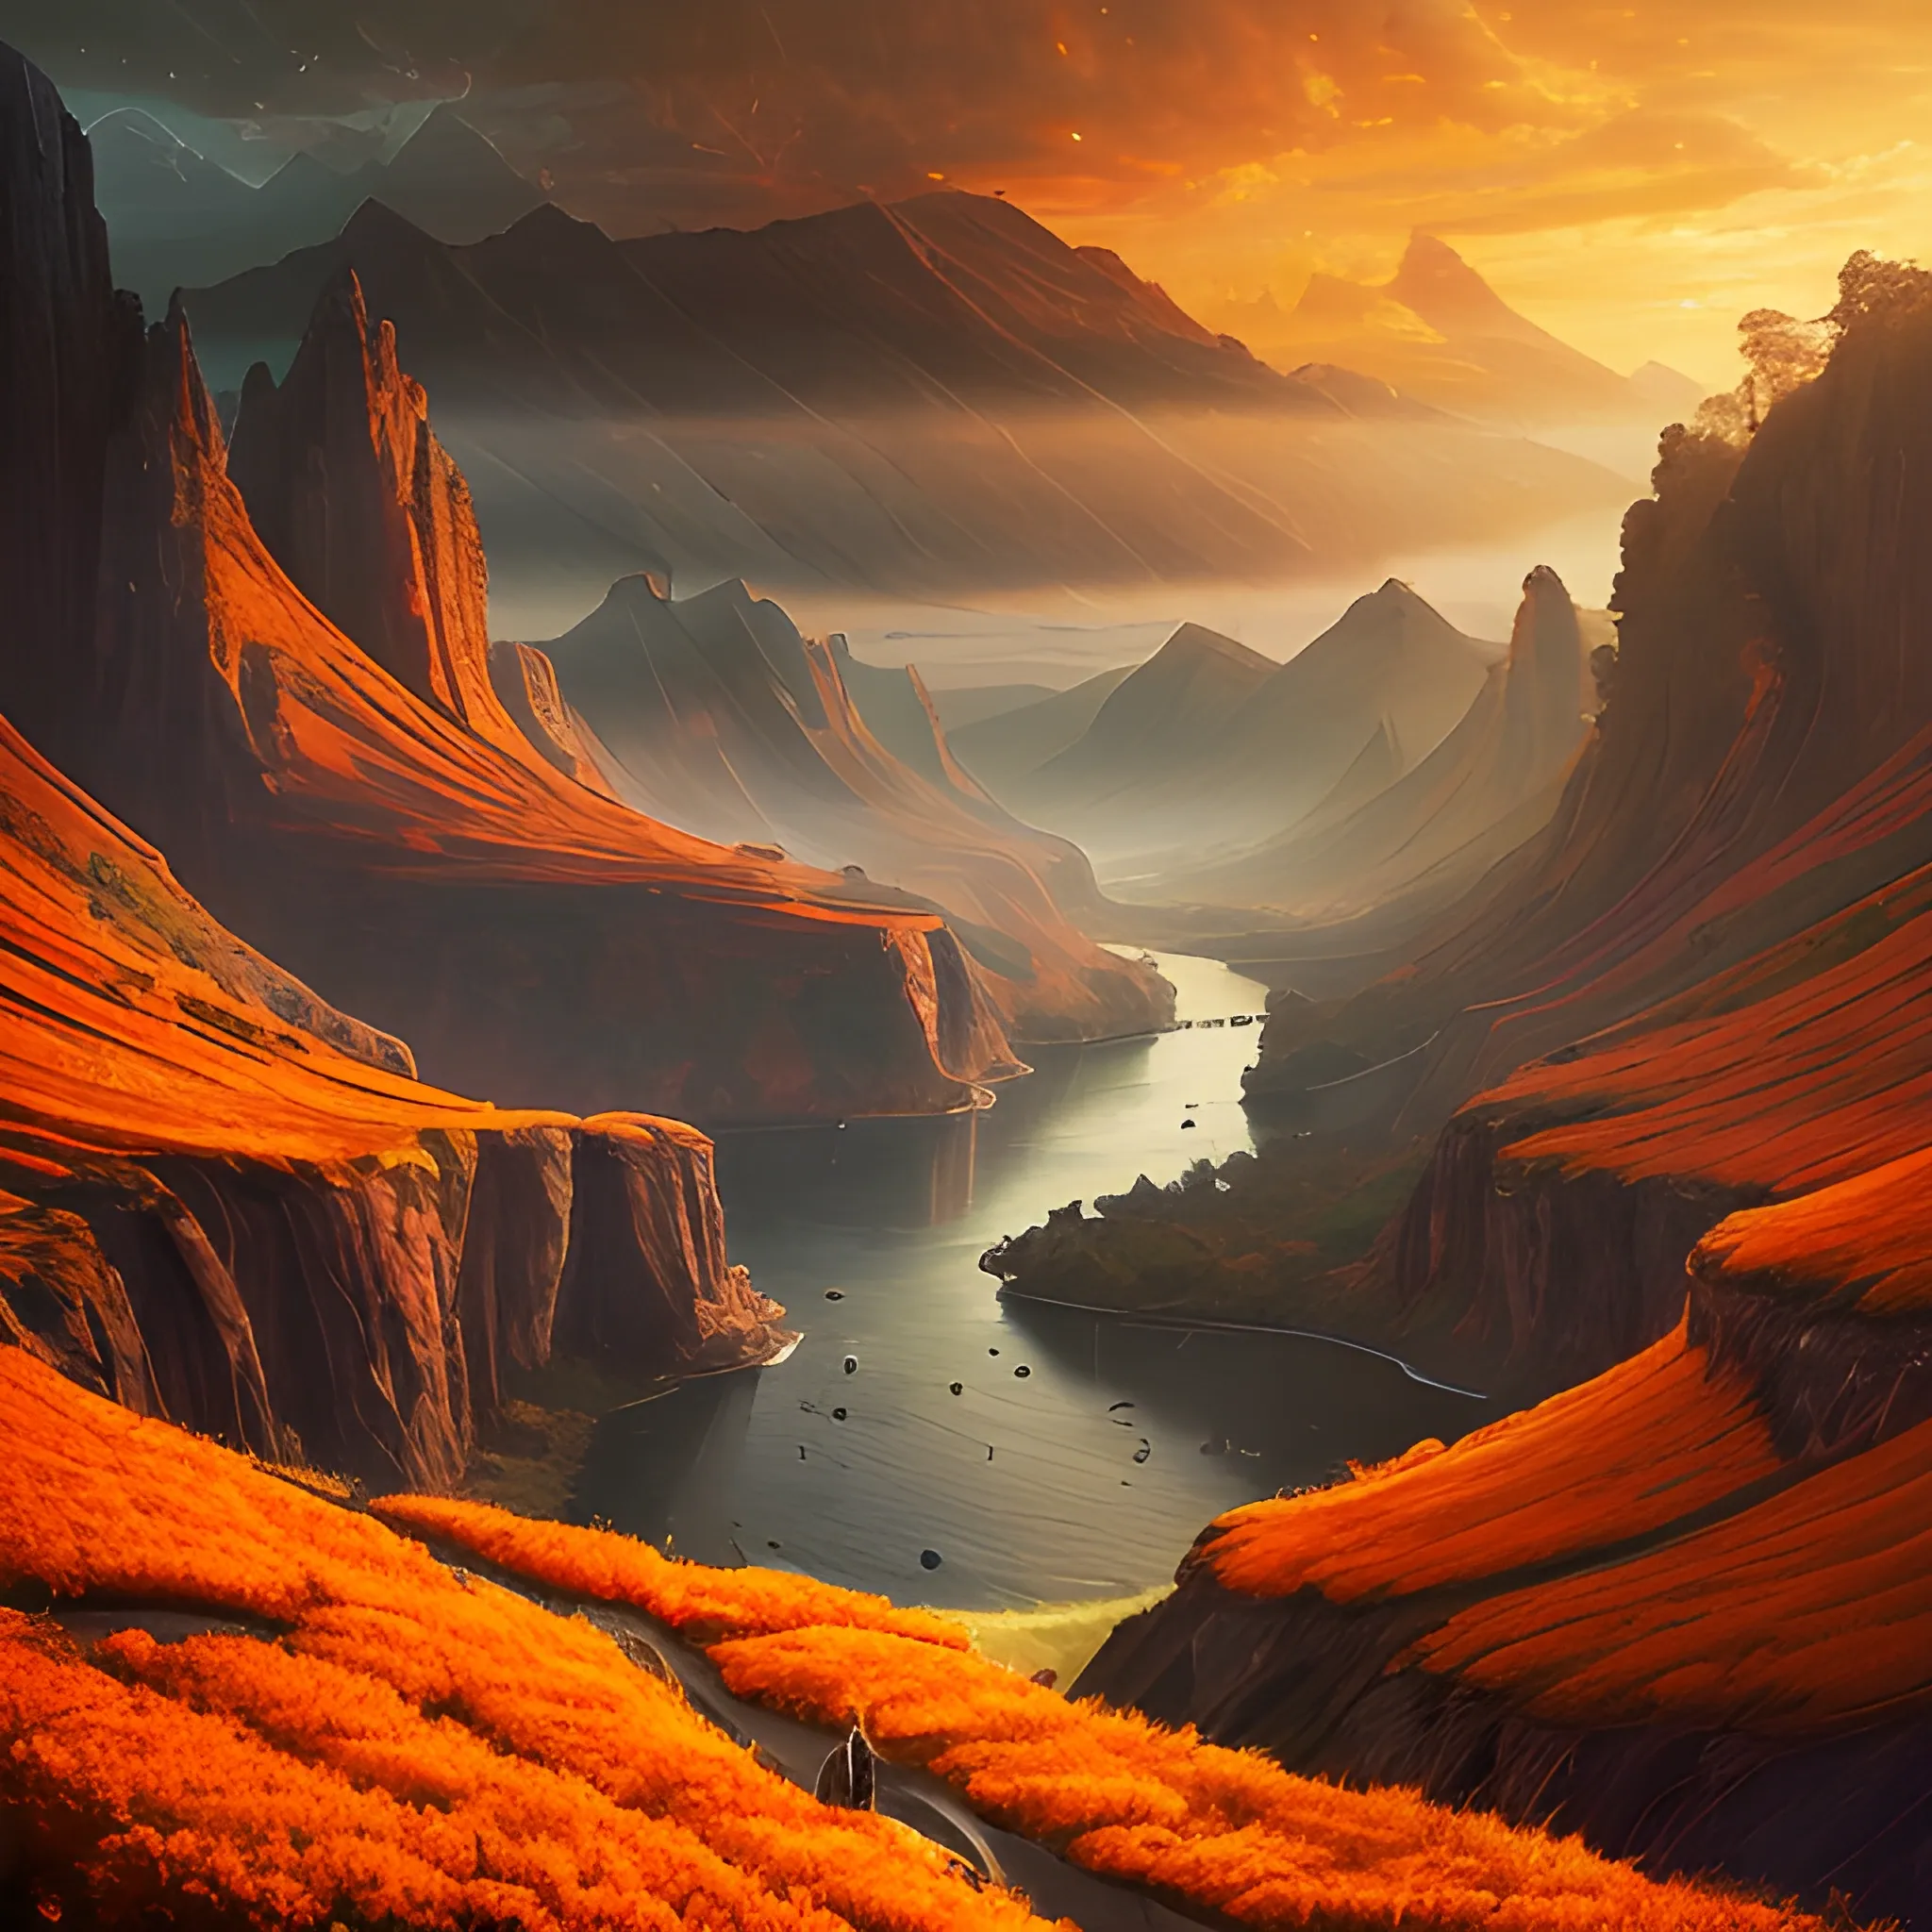 a beautiful landscape photo inspired by arcadia, cinematic atmospheric masterpiece, award winning, hyperdetailed, fantastic with warm tones of oranges and yellows, wonderful with a mid-aged modern looking woman with mid-long hair looking at this scenary knowing that the future is in her hands.